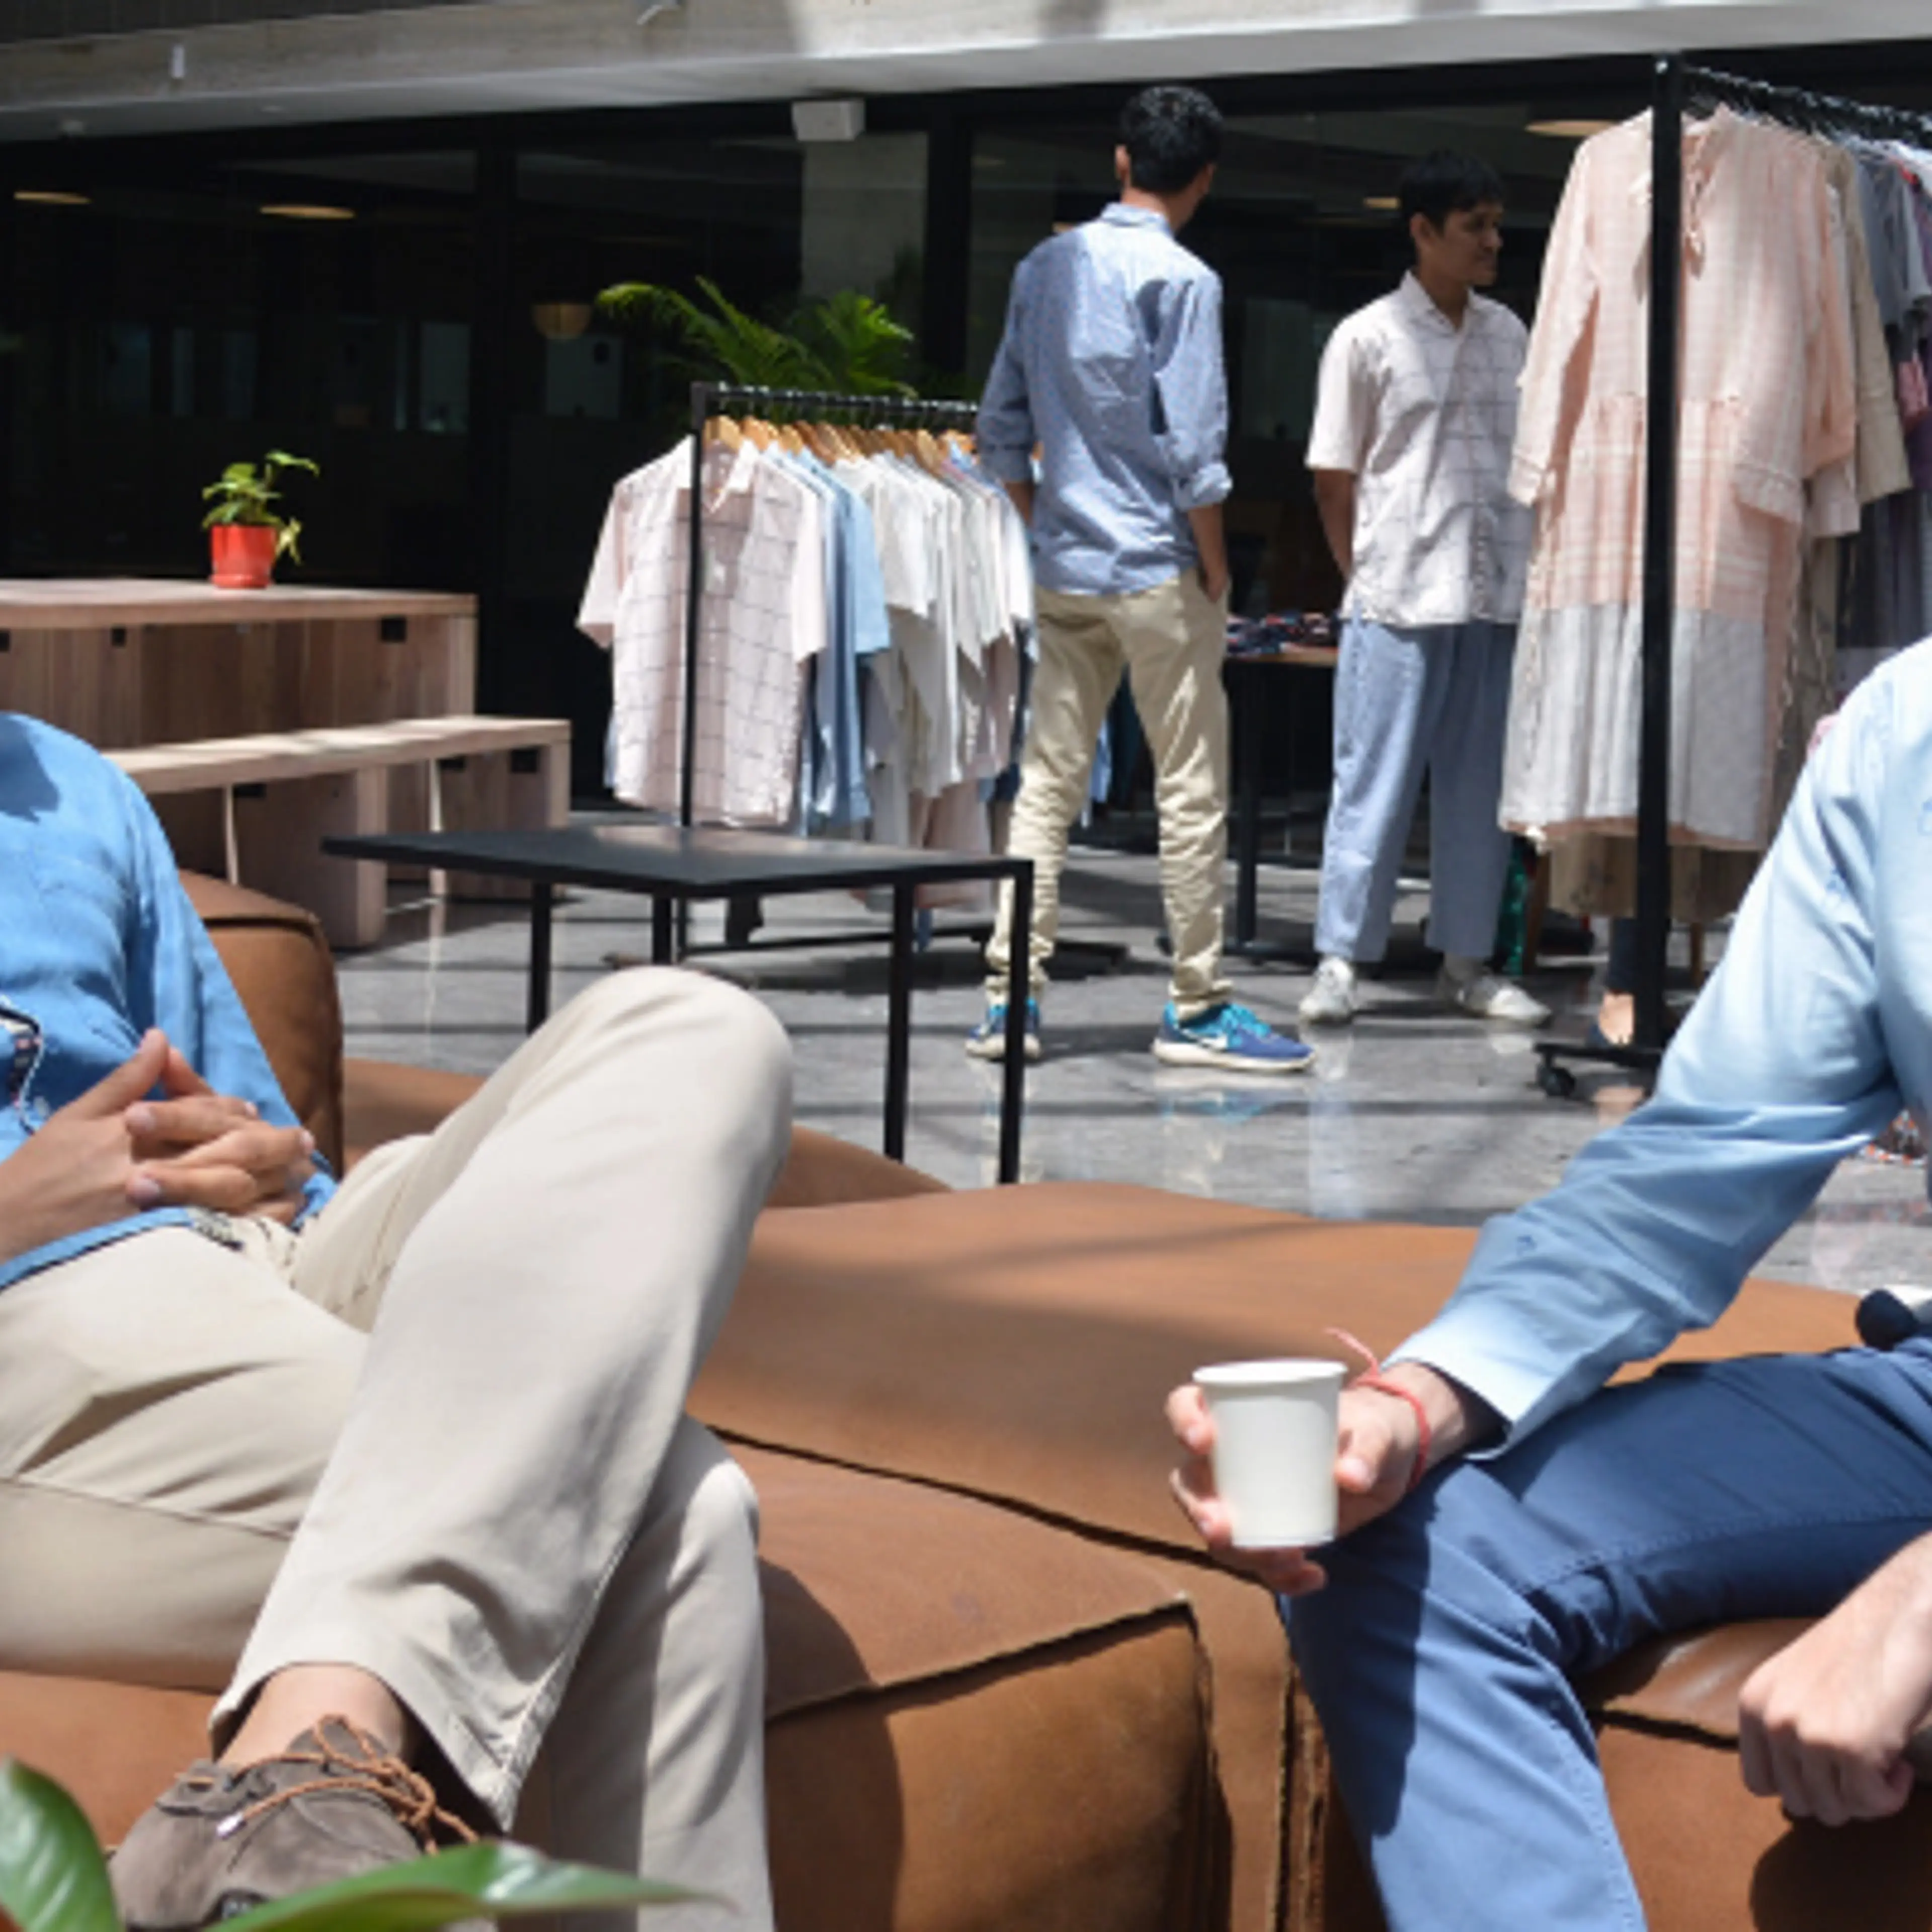 From Rs 5 lakh seed money to Rs 1.6 Cr turnover, how two friends built a clothing company to serve brands like Pepsi and Godrej